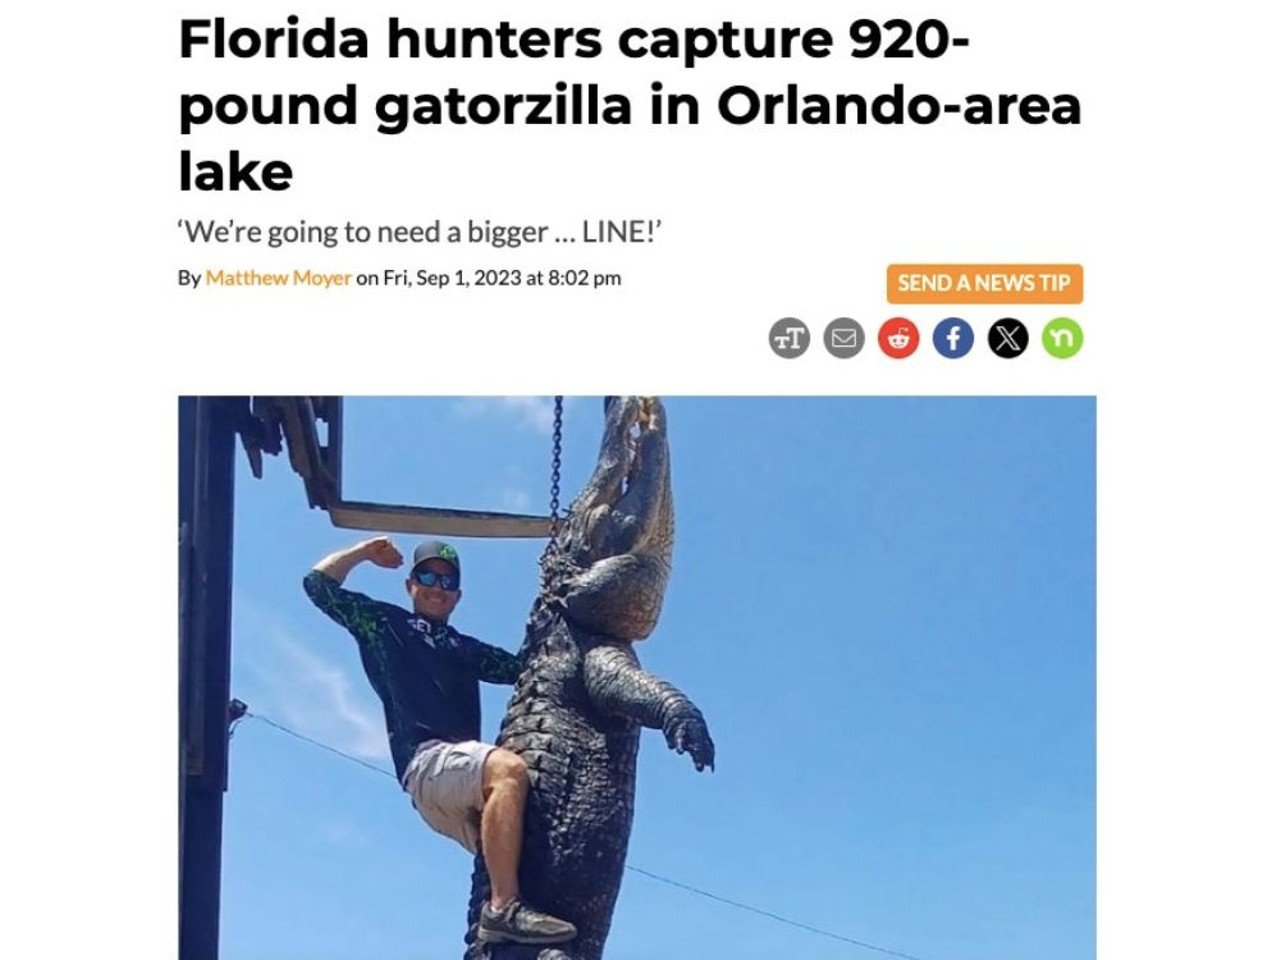 Hunters caught a 920-pound gator in an Orlando-area lake. Apparently it had the makings of Moby Dick, but Central Florida-style. Read full article